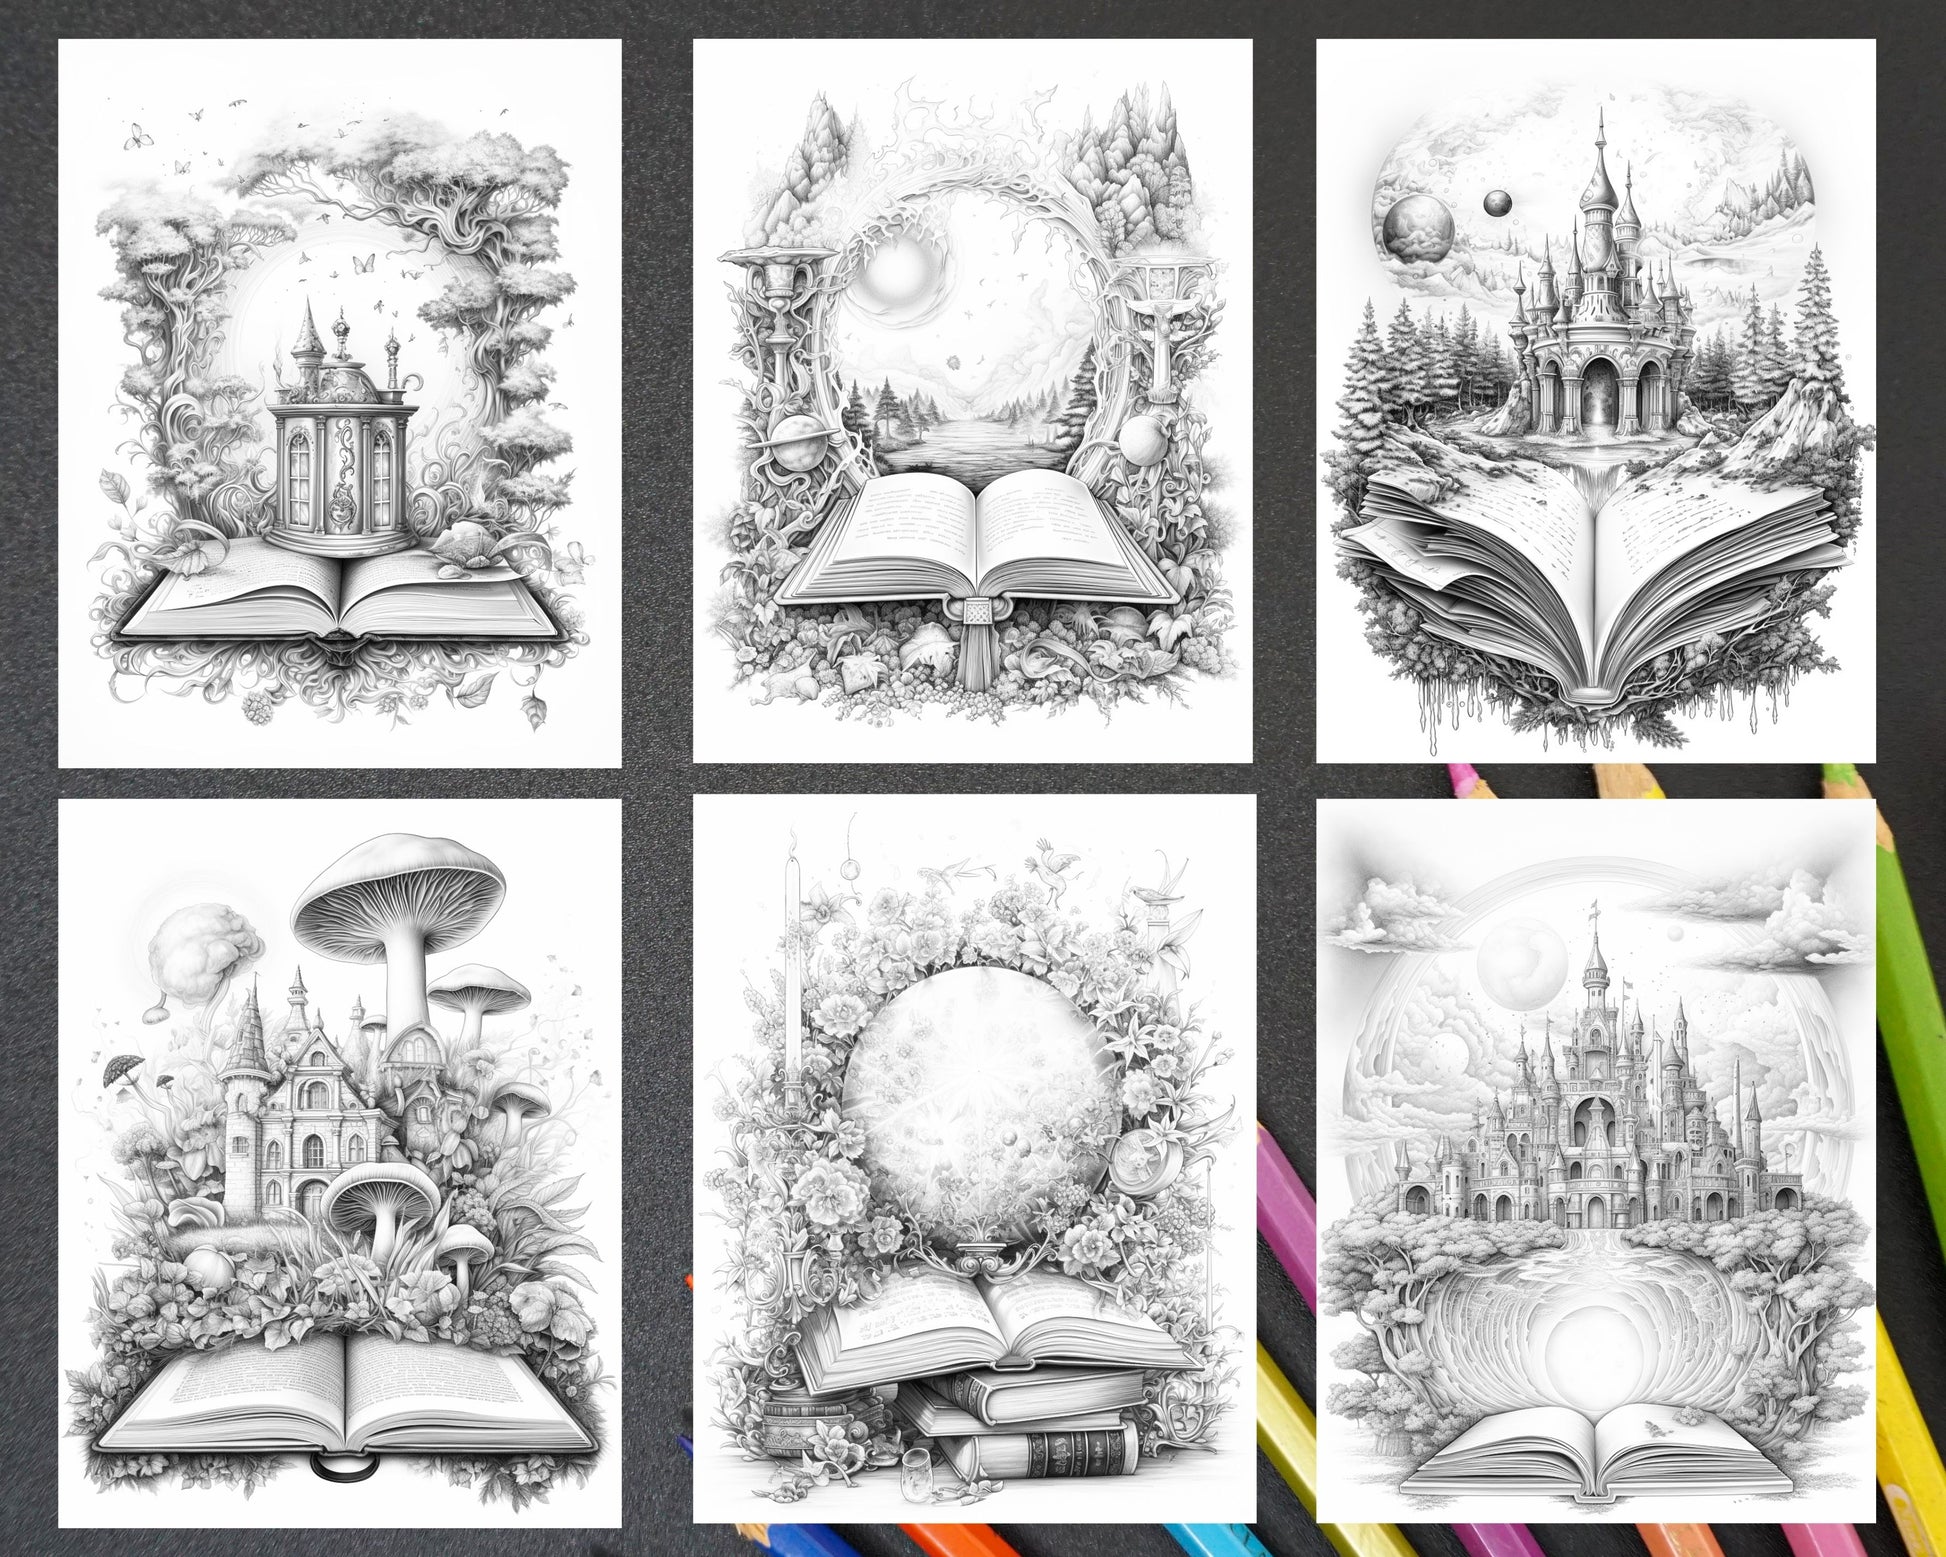 Grayscale Coloring Pages for Adults, Magical Books Coloring Pages, Relaxing Art Therapy for Grown-ups, Printable Art for Stress Relief, Instant Download Coloring Pages, Fantasy Coloring Book for Adults, Enchanting Fantasy Coloring Pages, Coloring Books for Mindful Relaxation